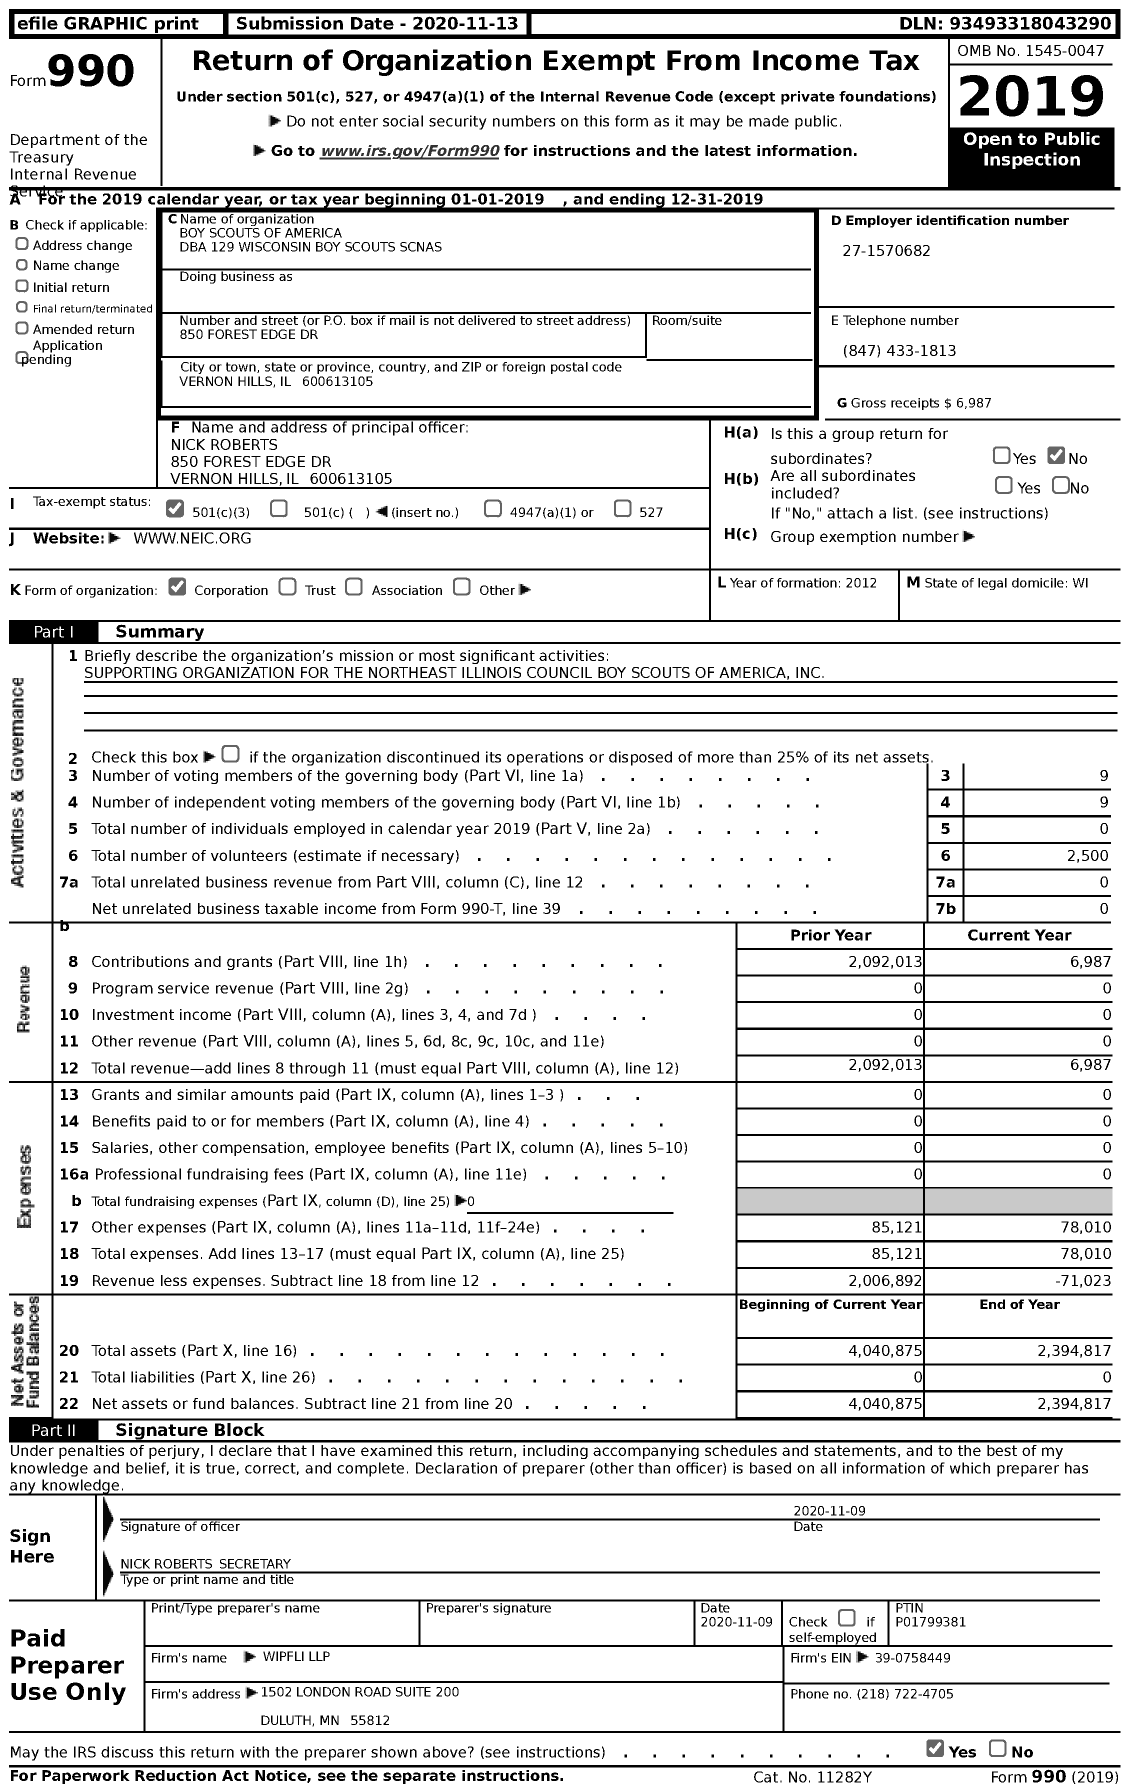 Image of first page of 2019 Form 990 for Boy Scouts of America - 129 Wisconsin Boy Scouts Scnas